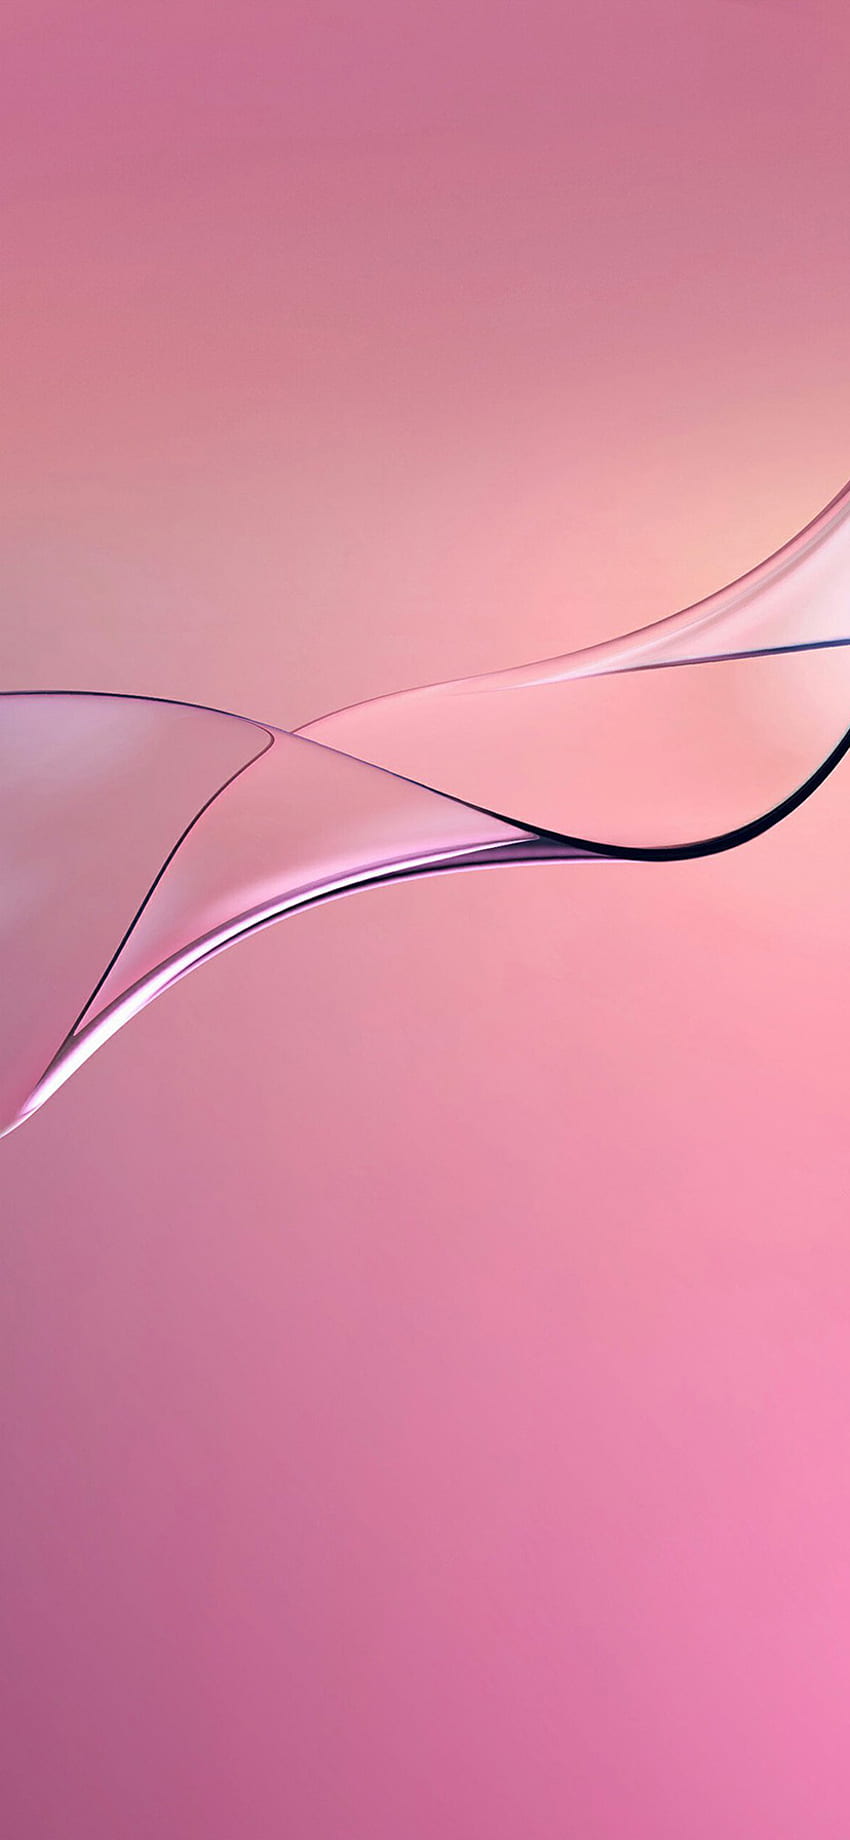 iPhone XR for curves pink abstract hazy design HD phone wallpaper